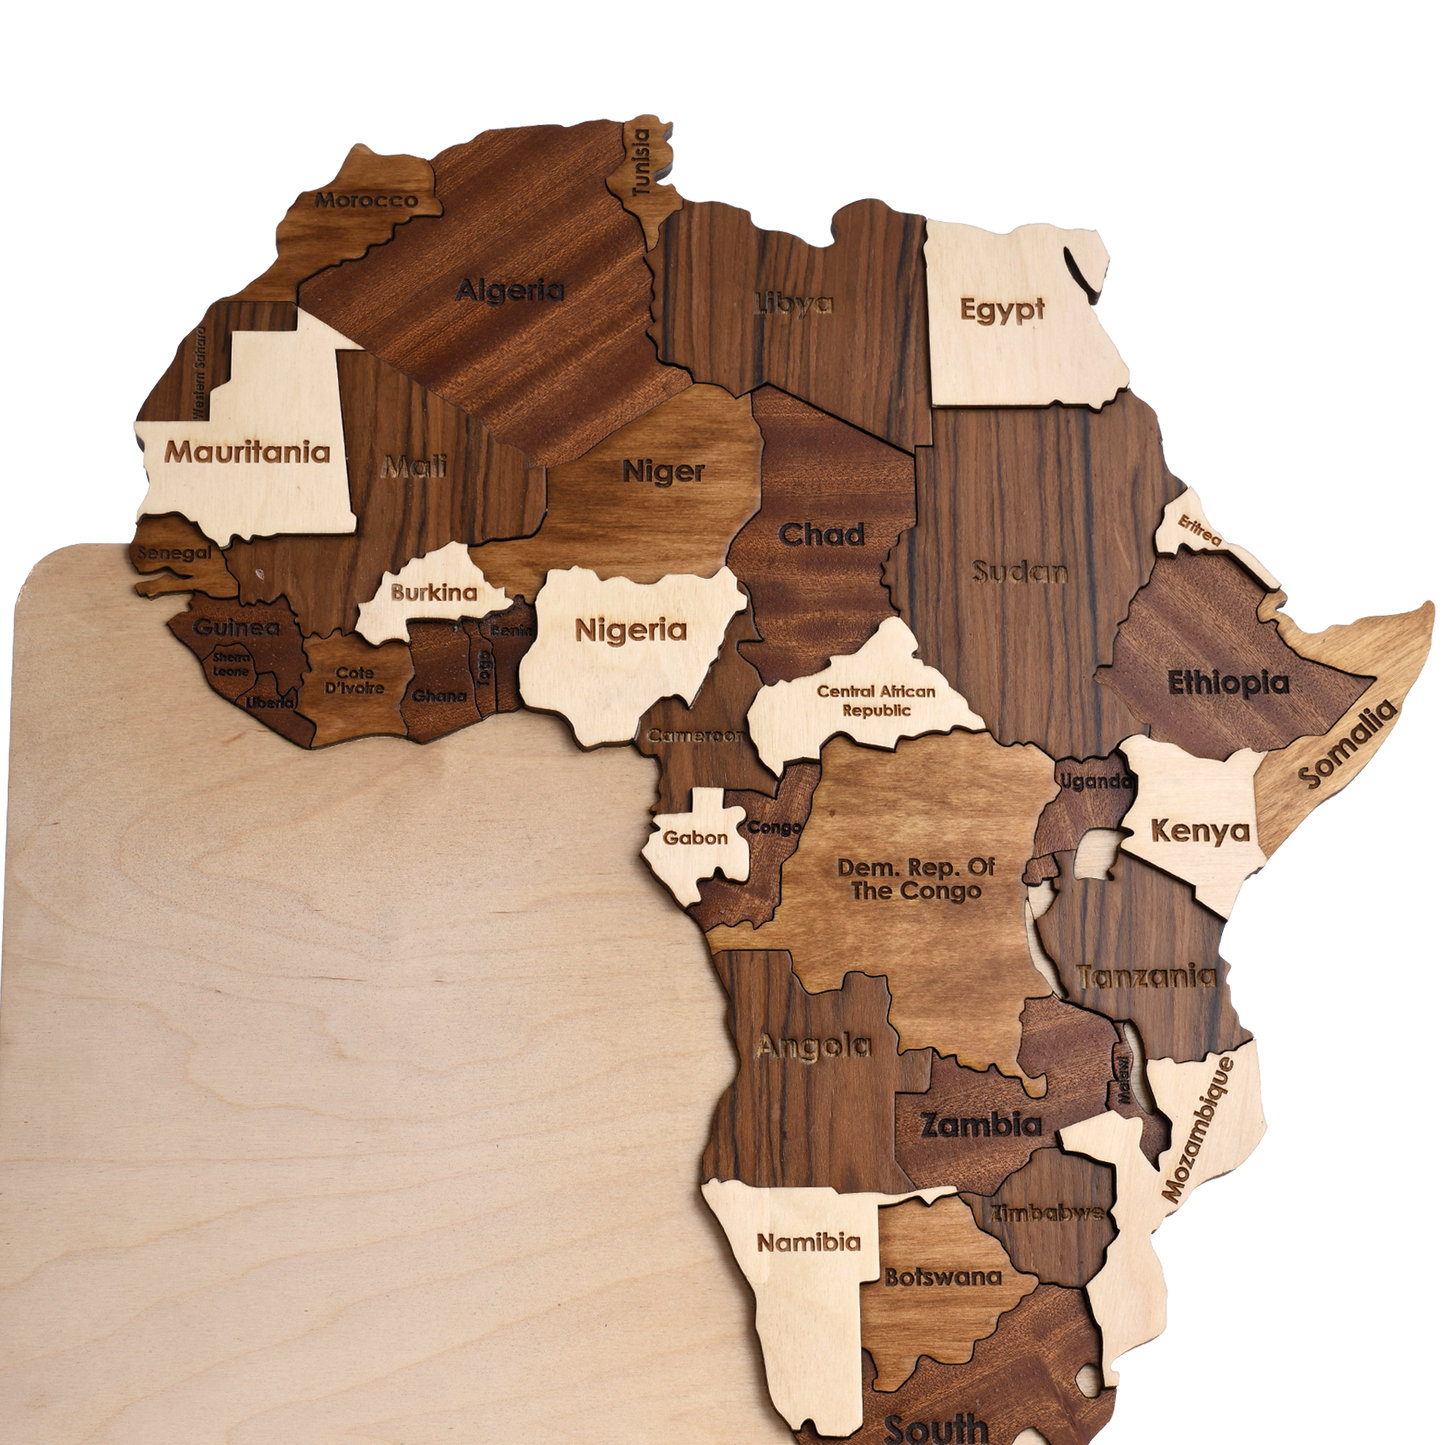 Cartographer's Pride: Wooden Trophy Showcasing Customizable 3D Maps of Your Choice